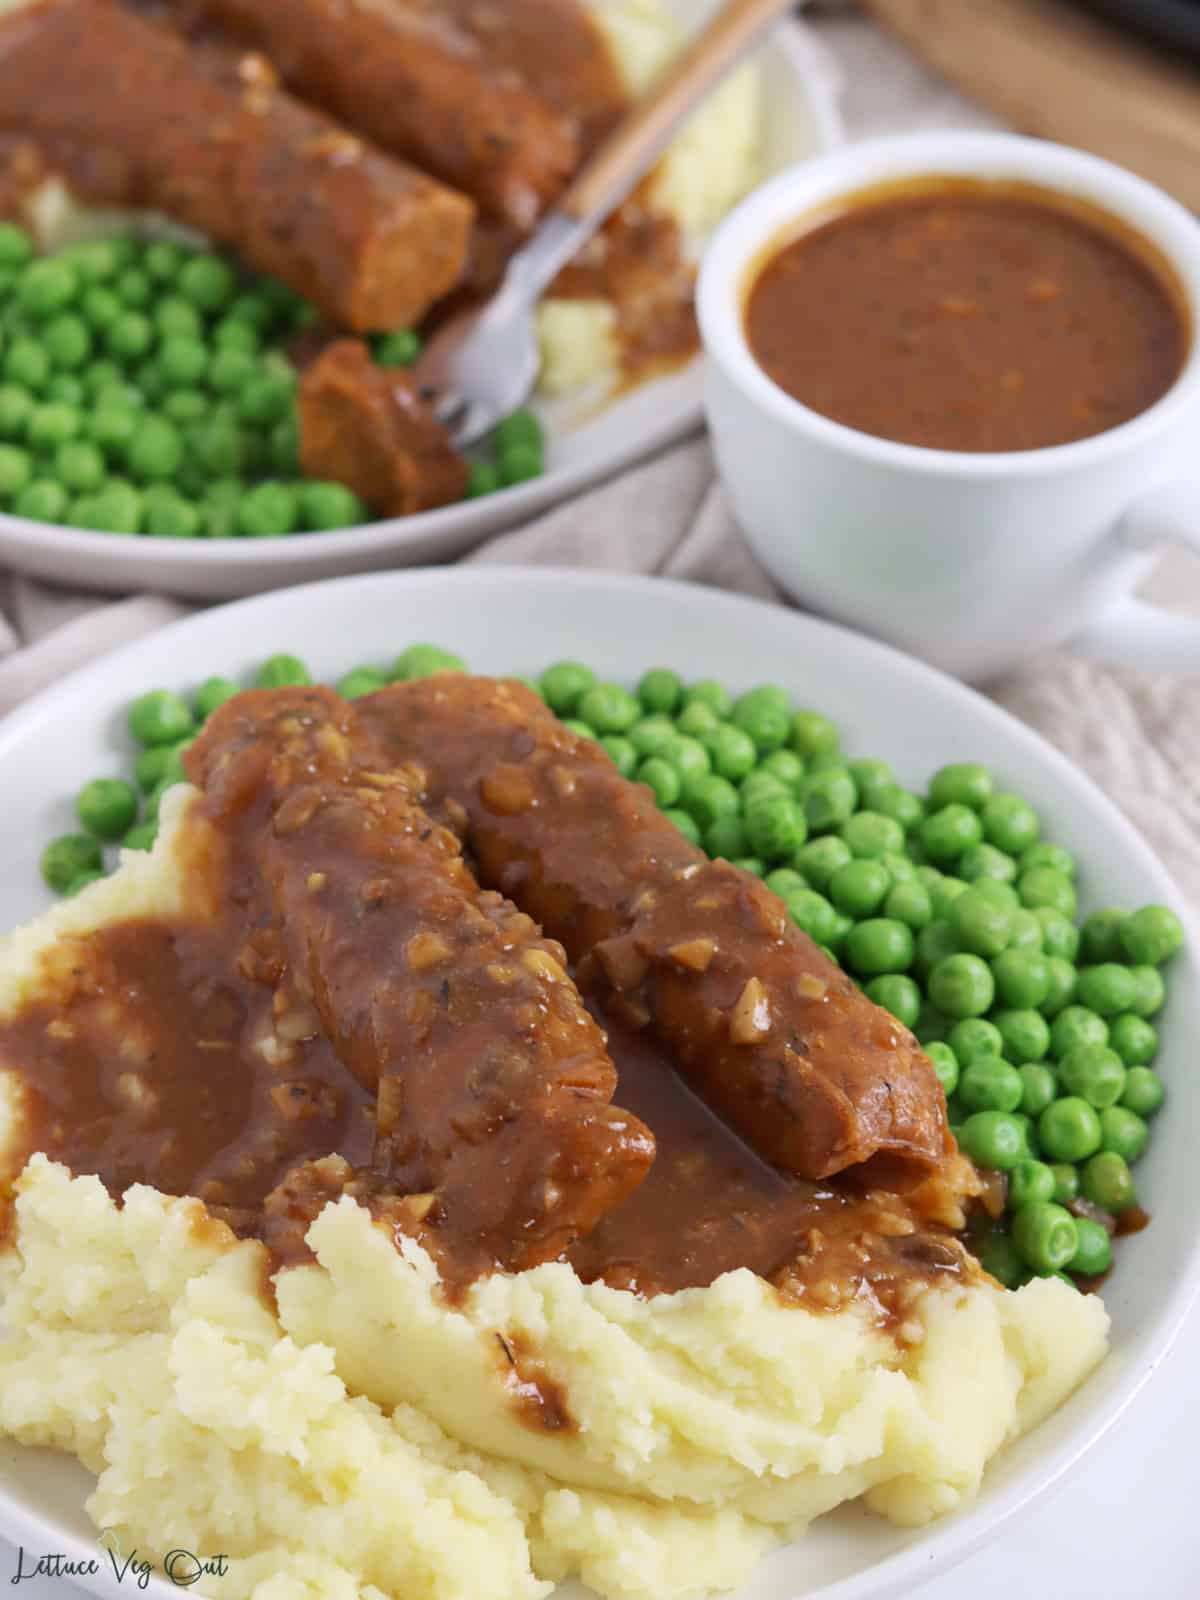 Plate of sausage, mashed potatoes, peas and gravy with small dish of gravy in background.